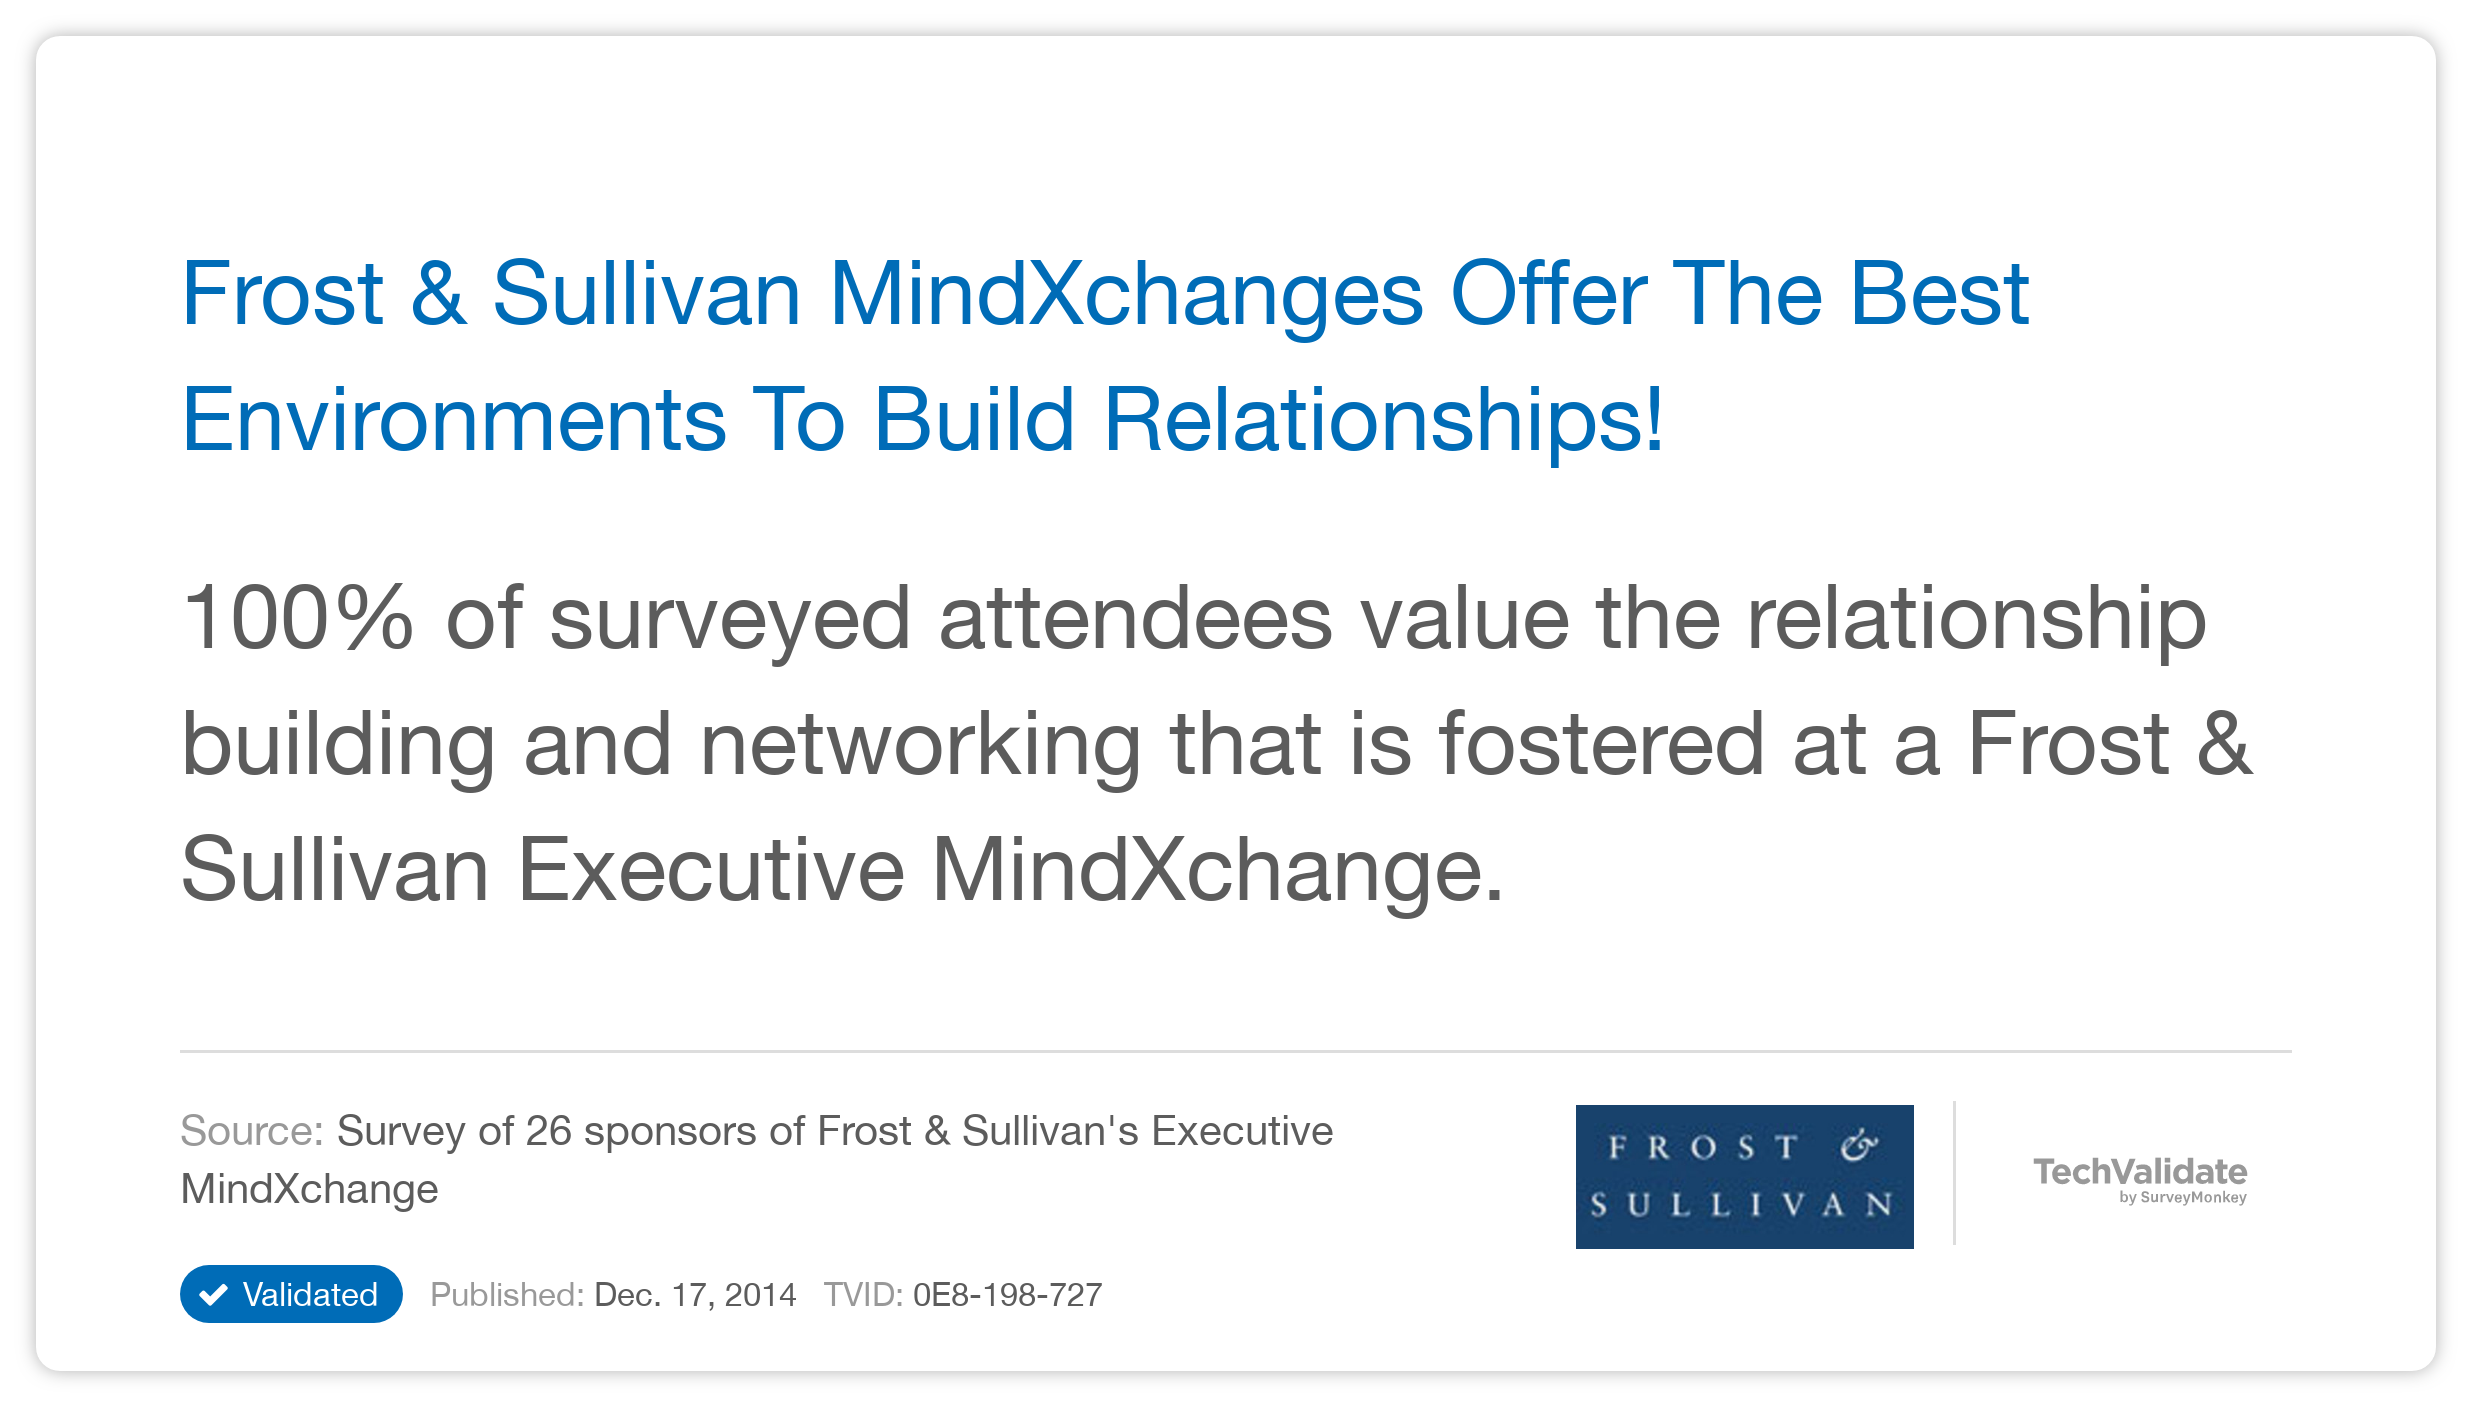 Frost & Sullivan MindXchanges  Offer The Best Environments To Build Relationships!